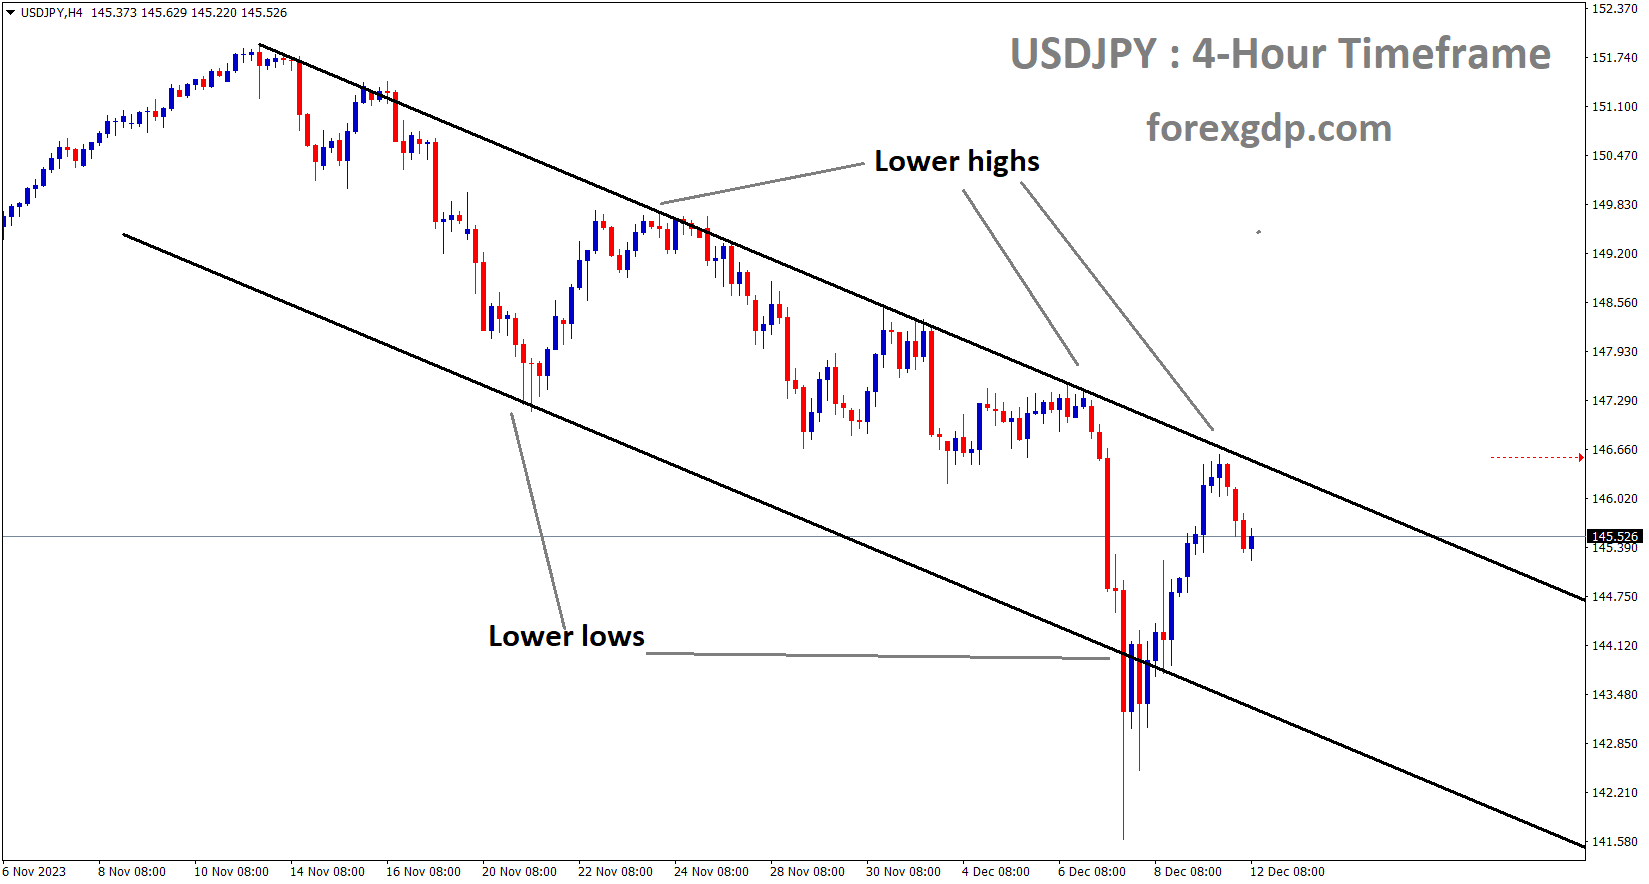 USDJPY is moving in Descending channel and the Market has fallen from the lower high area